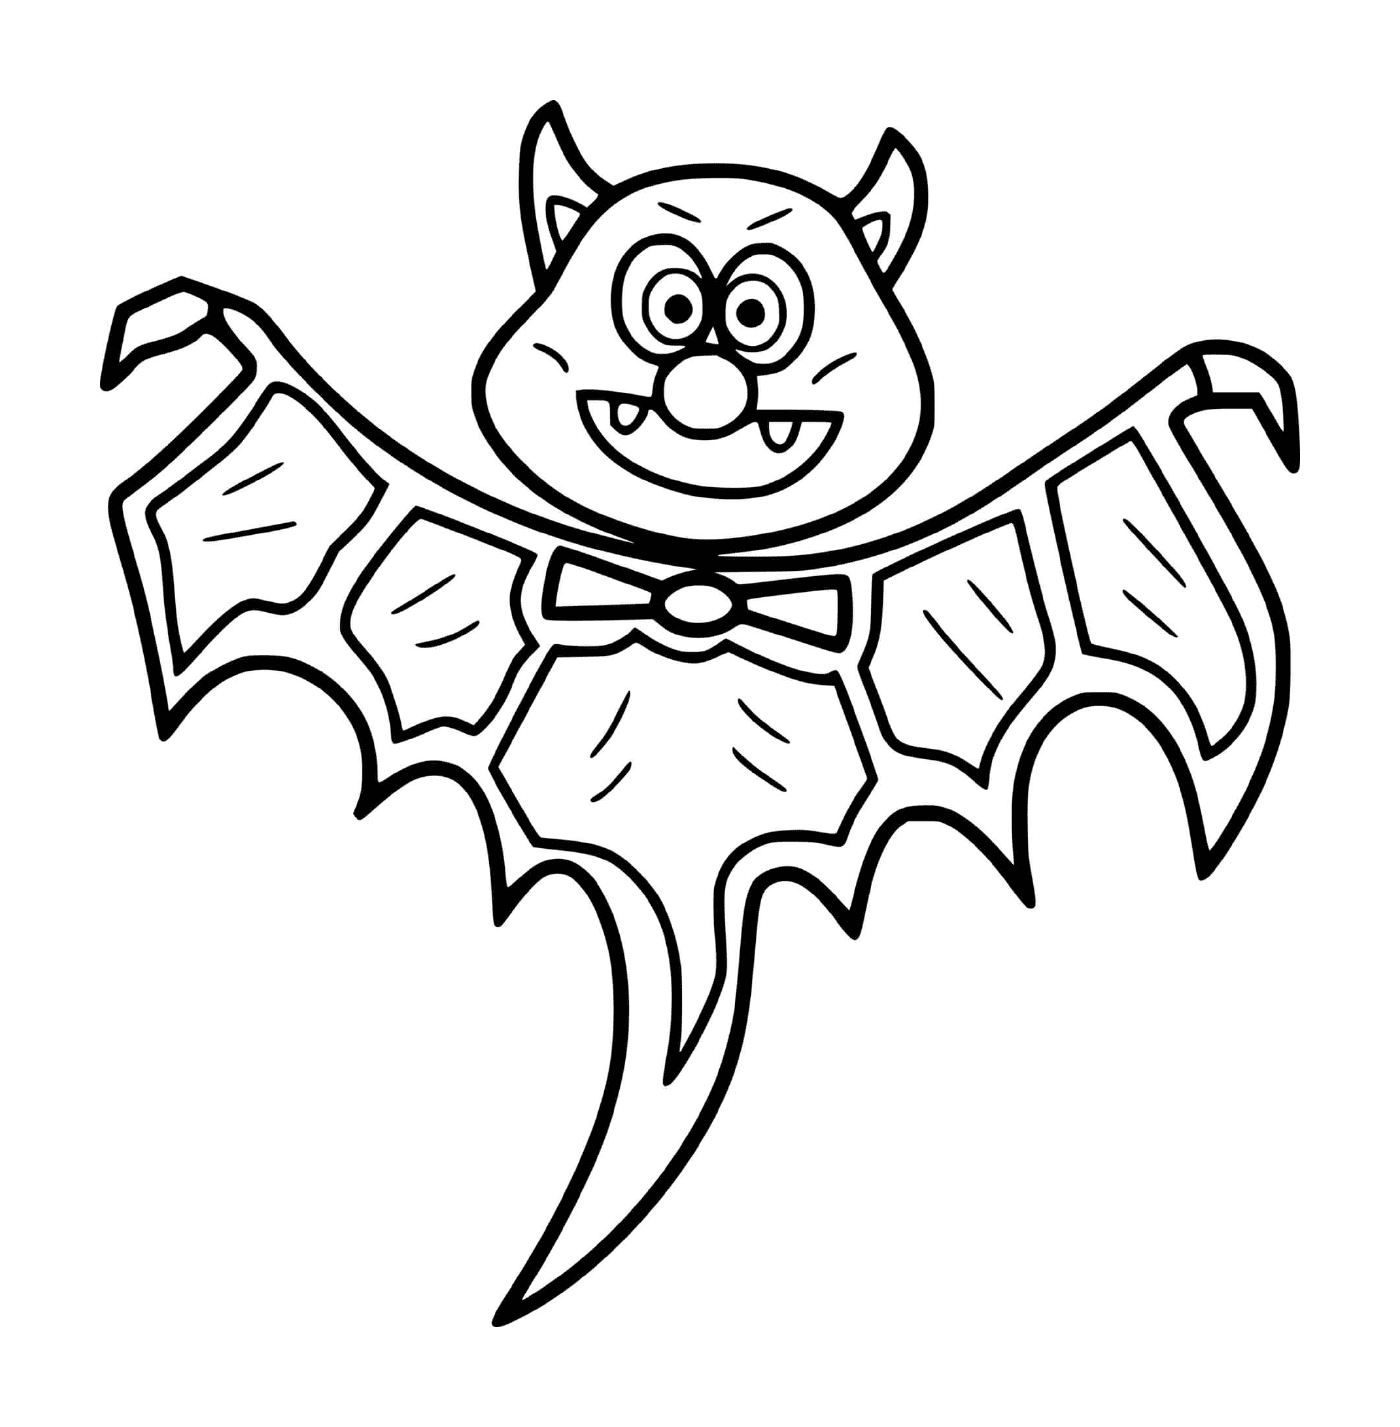  scary bat for Halloween 